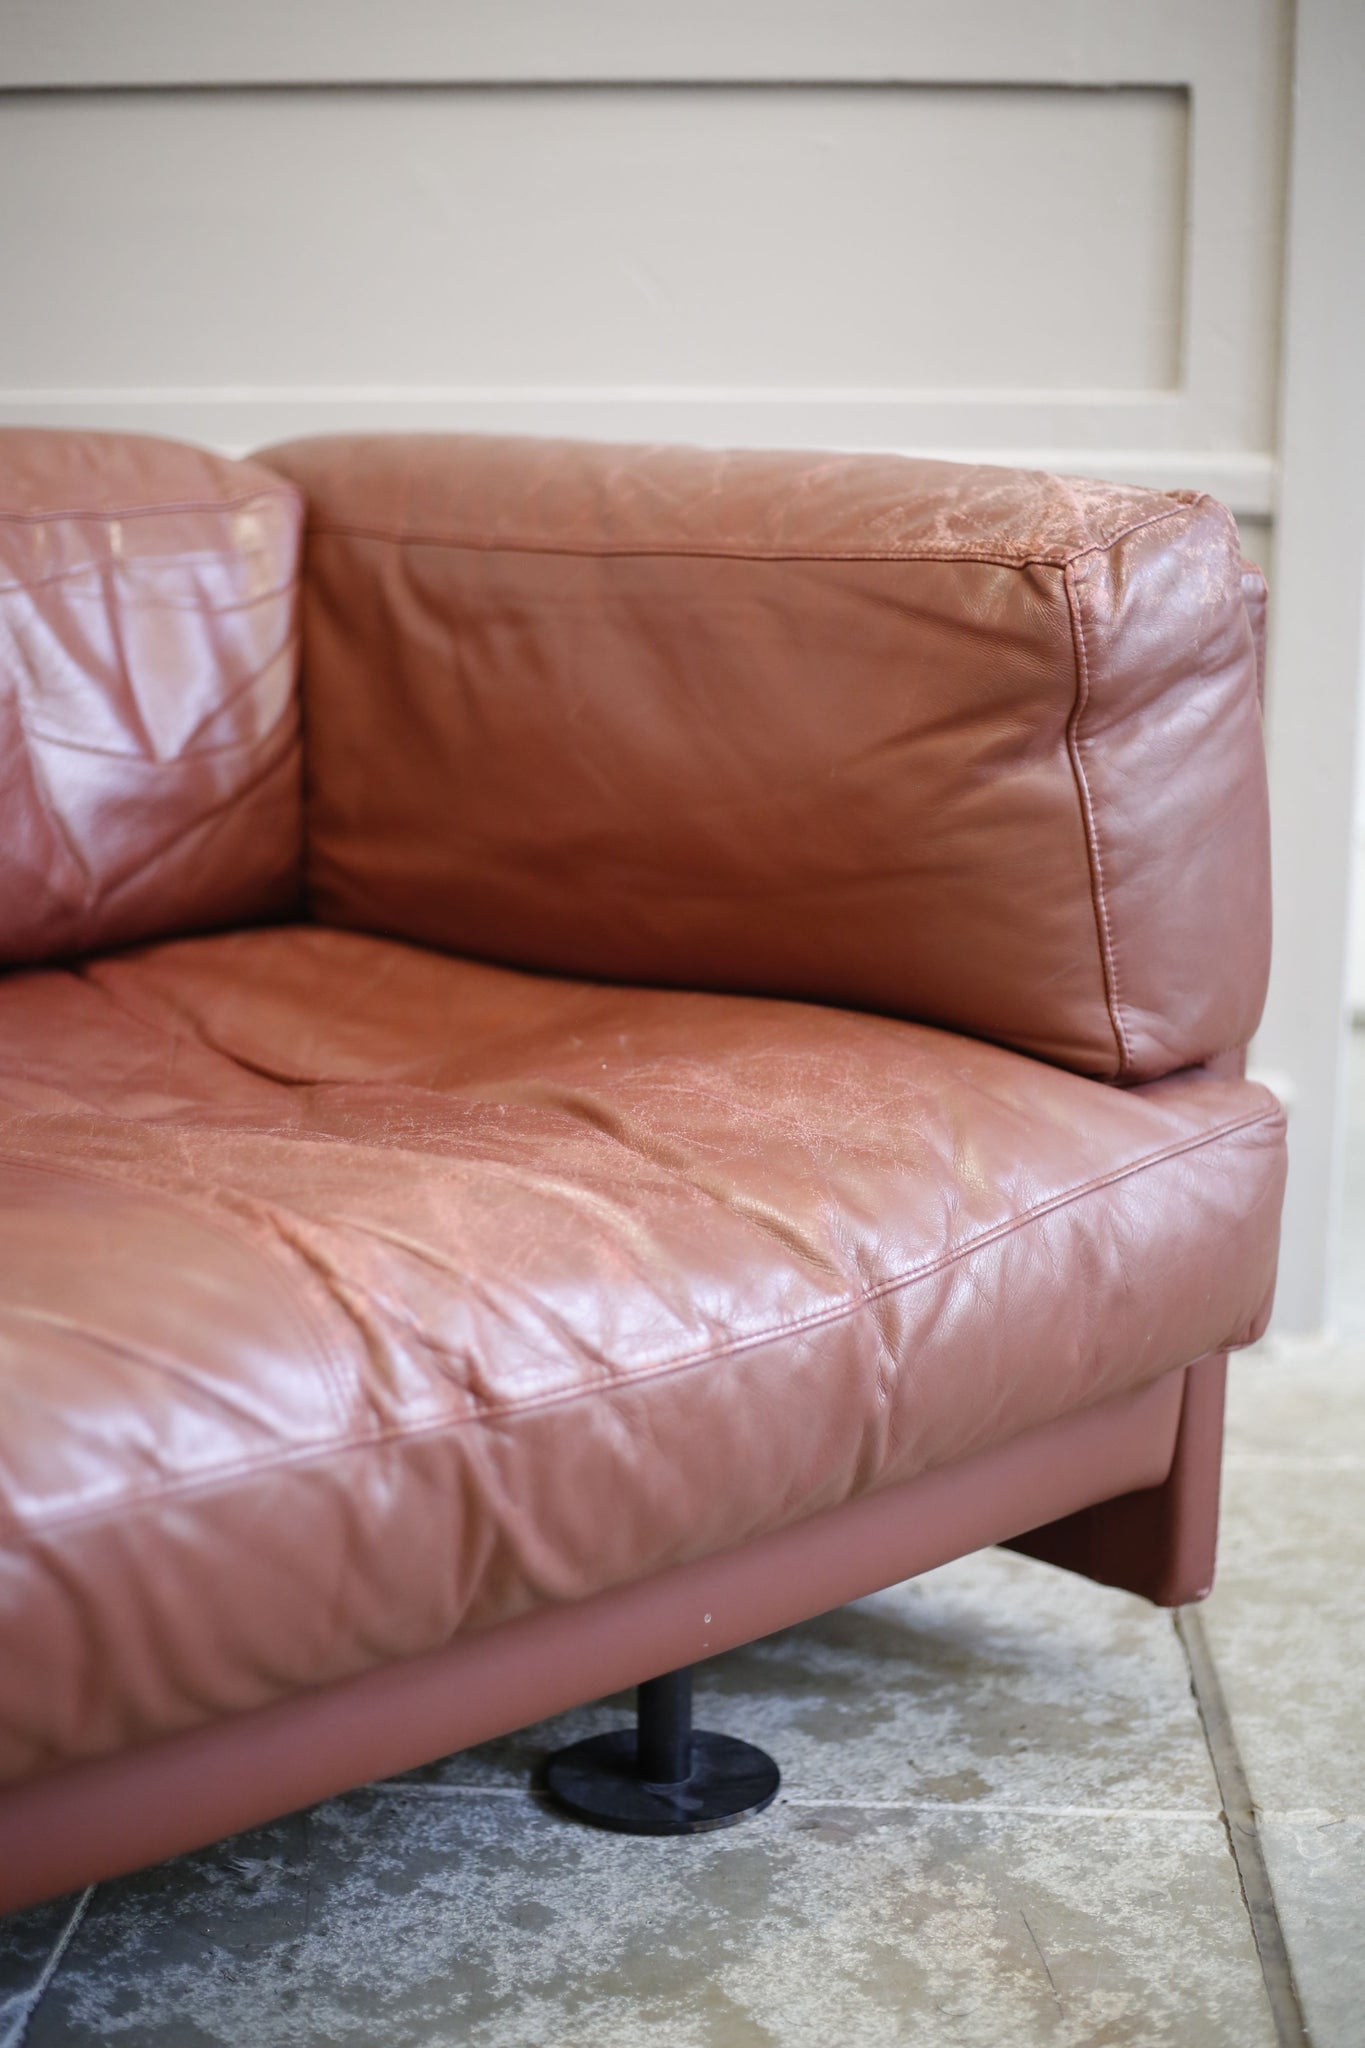 Large mid 20th century red leather sofa - TallBoy Interiors